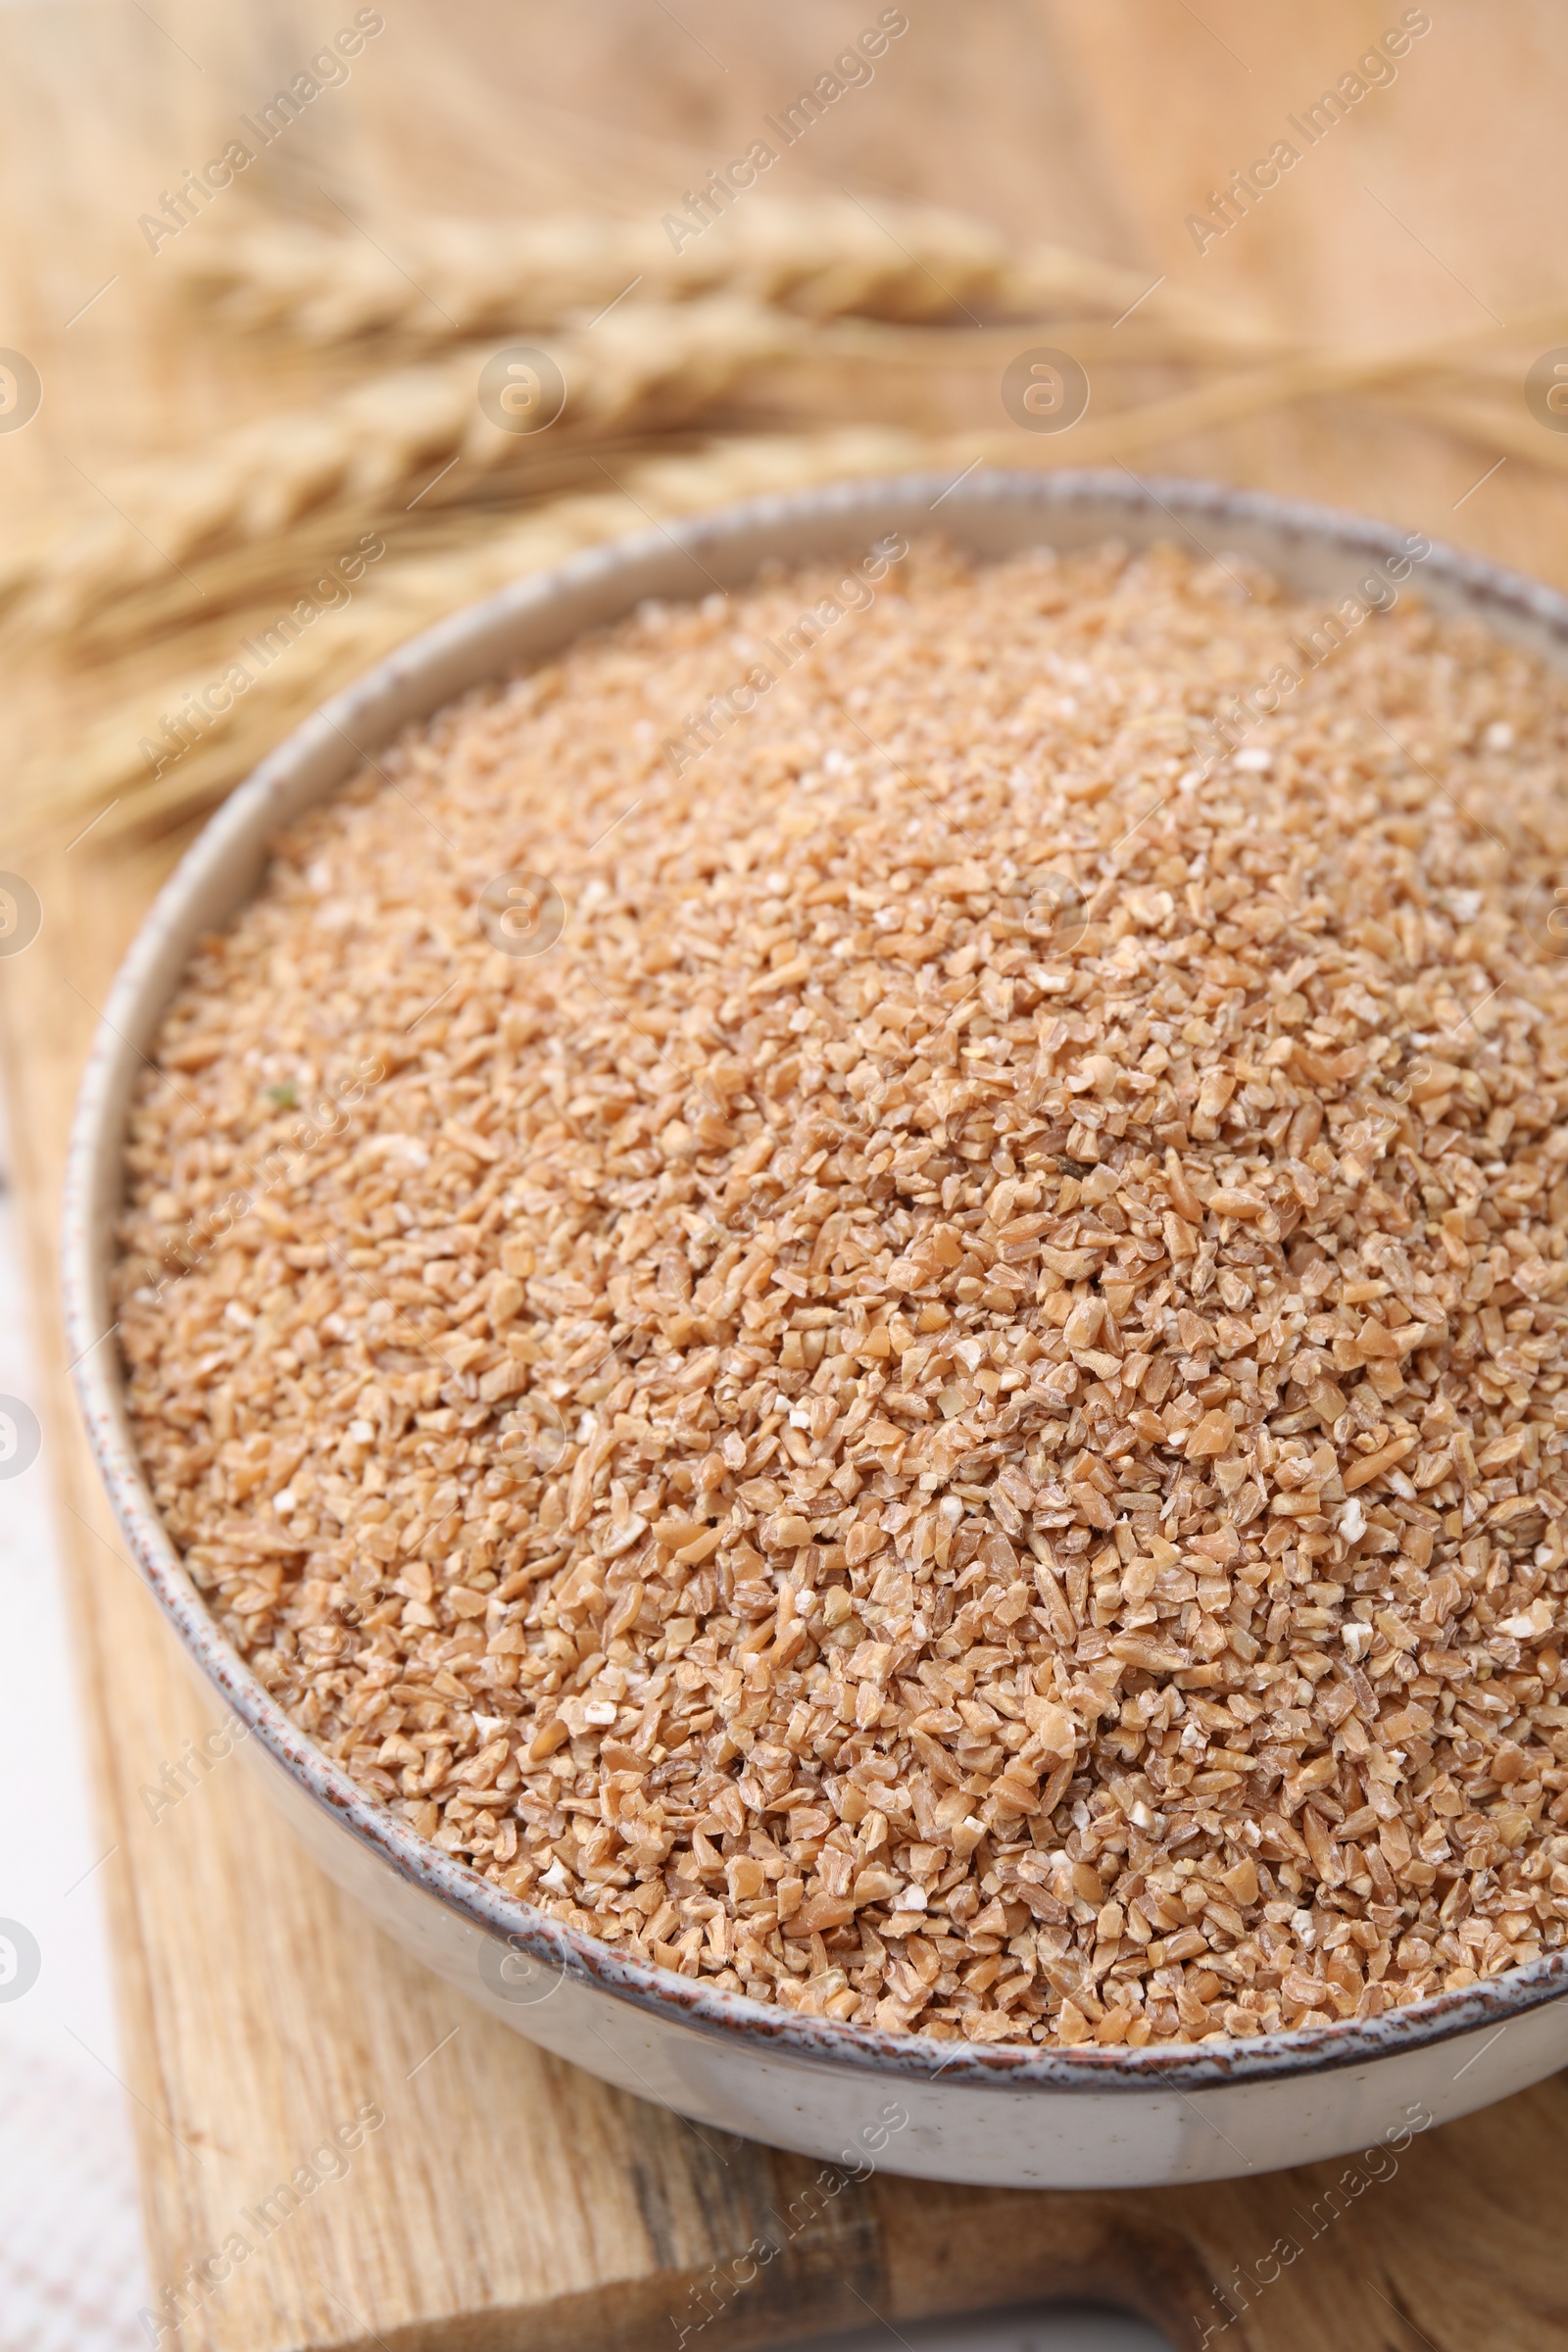 Photo of Dry wheat groats in bowl on table, closeup